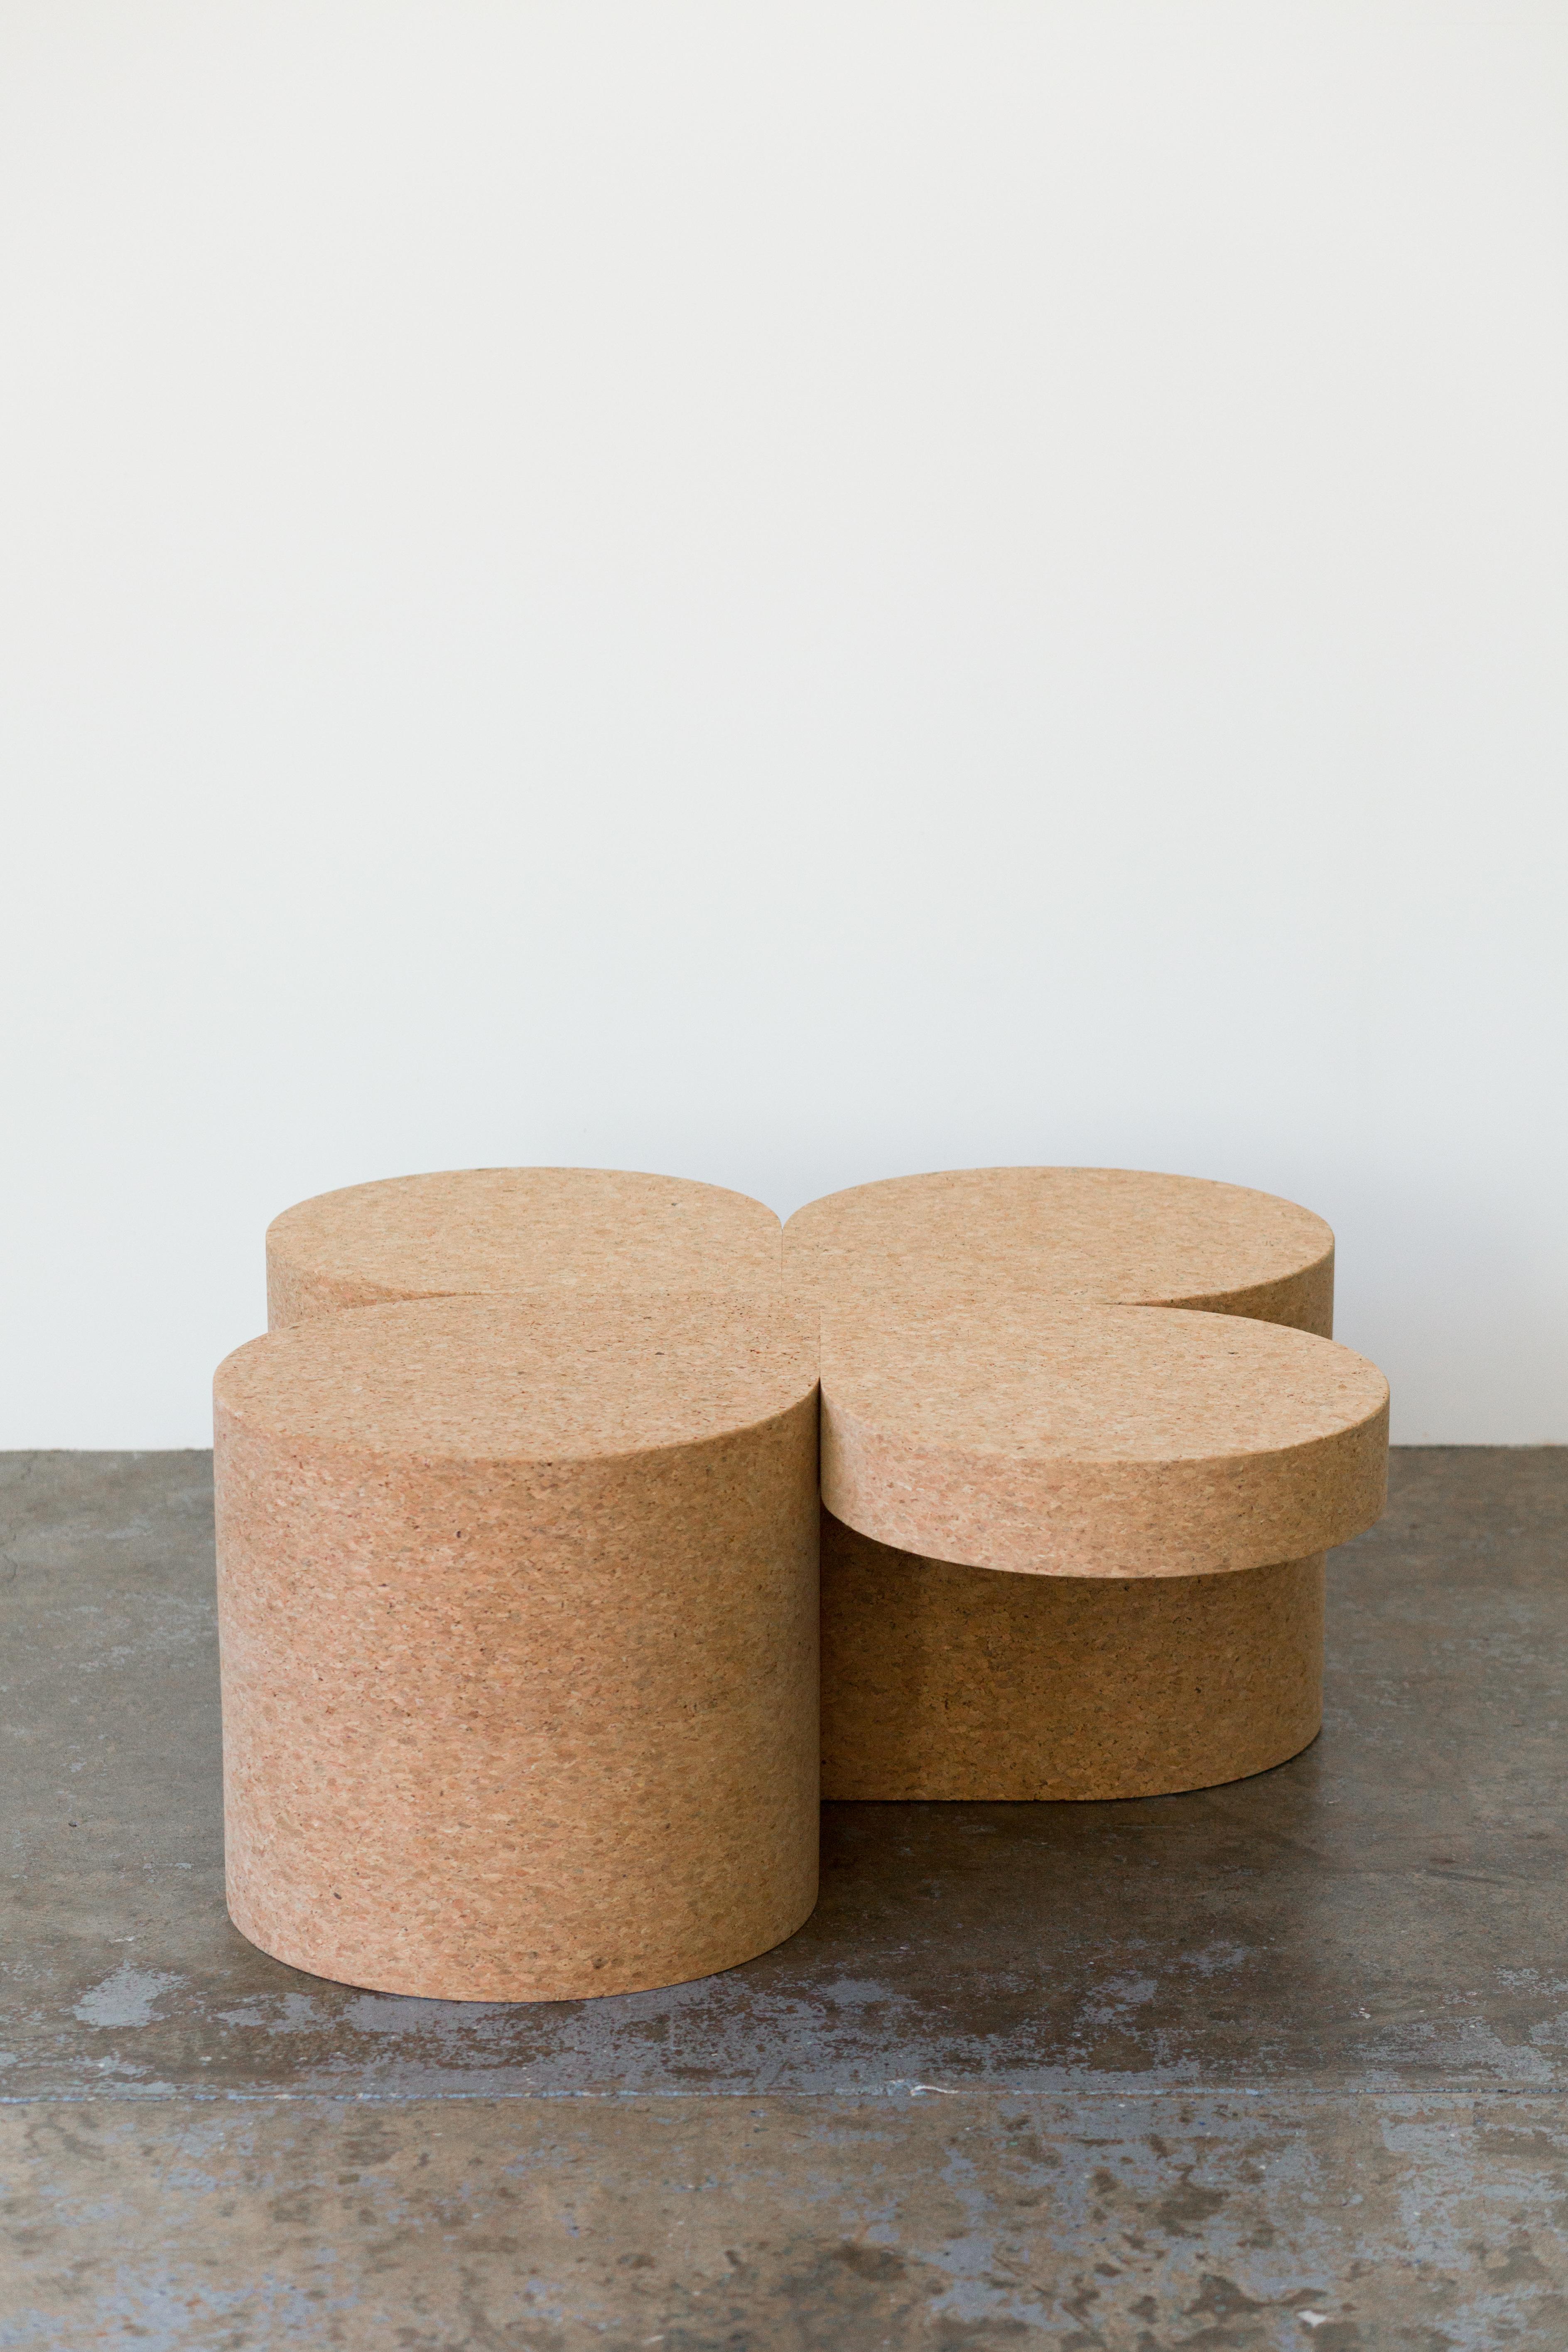 A realization of meticulous research, this piece is part of a collection that highlights the formal longevity and environmental sustainability of Mediterranean cork.

Monolithic and inviting, it is cut from the cylindrical forms that are standard in